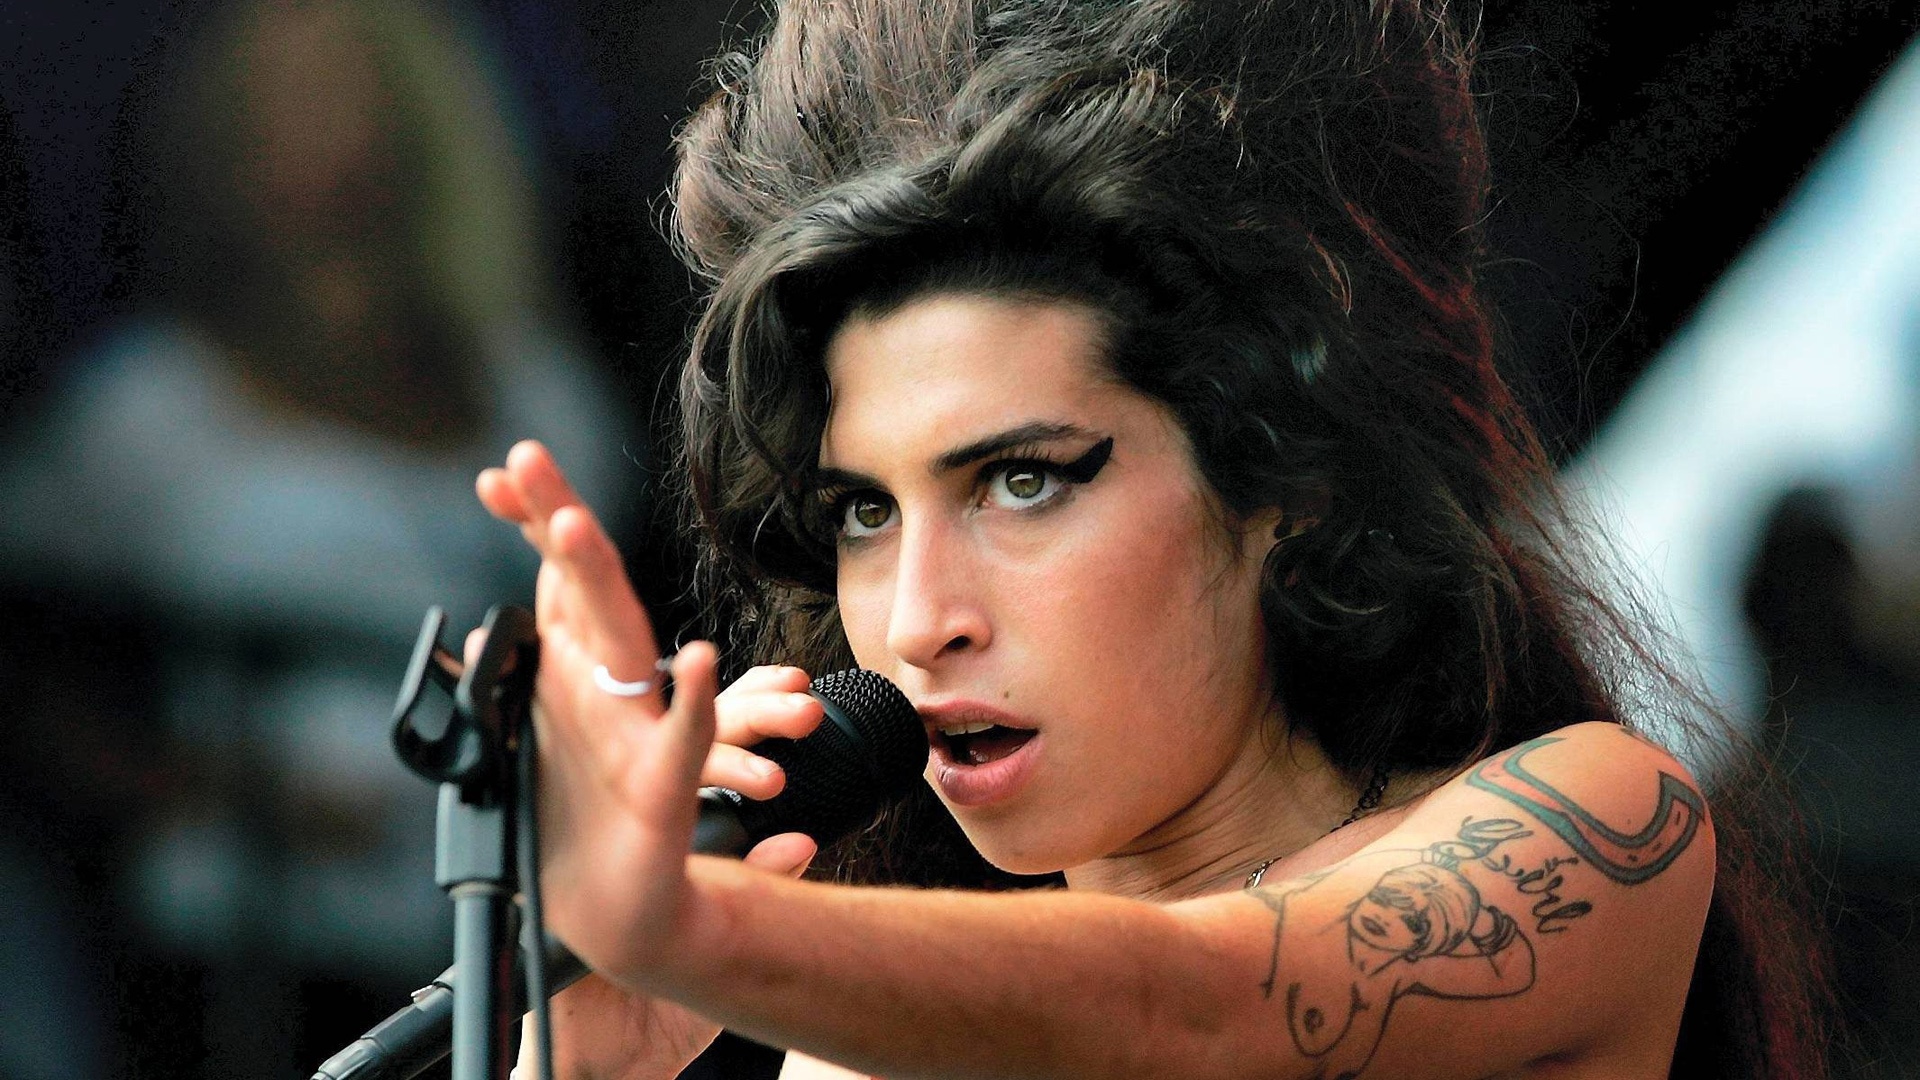 Amy Winehouse, High definition wallpapers, Stylish photos, Vibrant colors, 1920x1080 Full HD Desktop